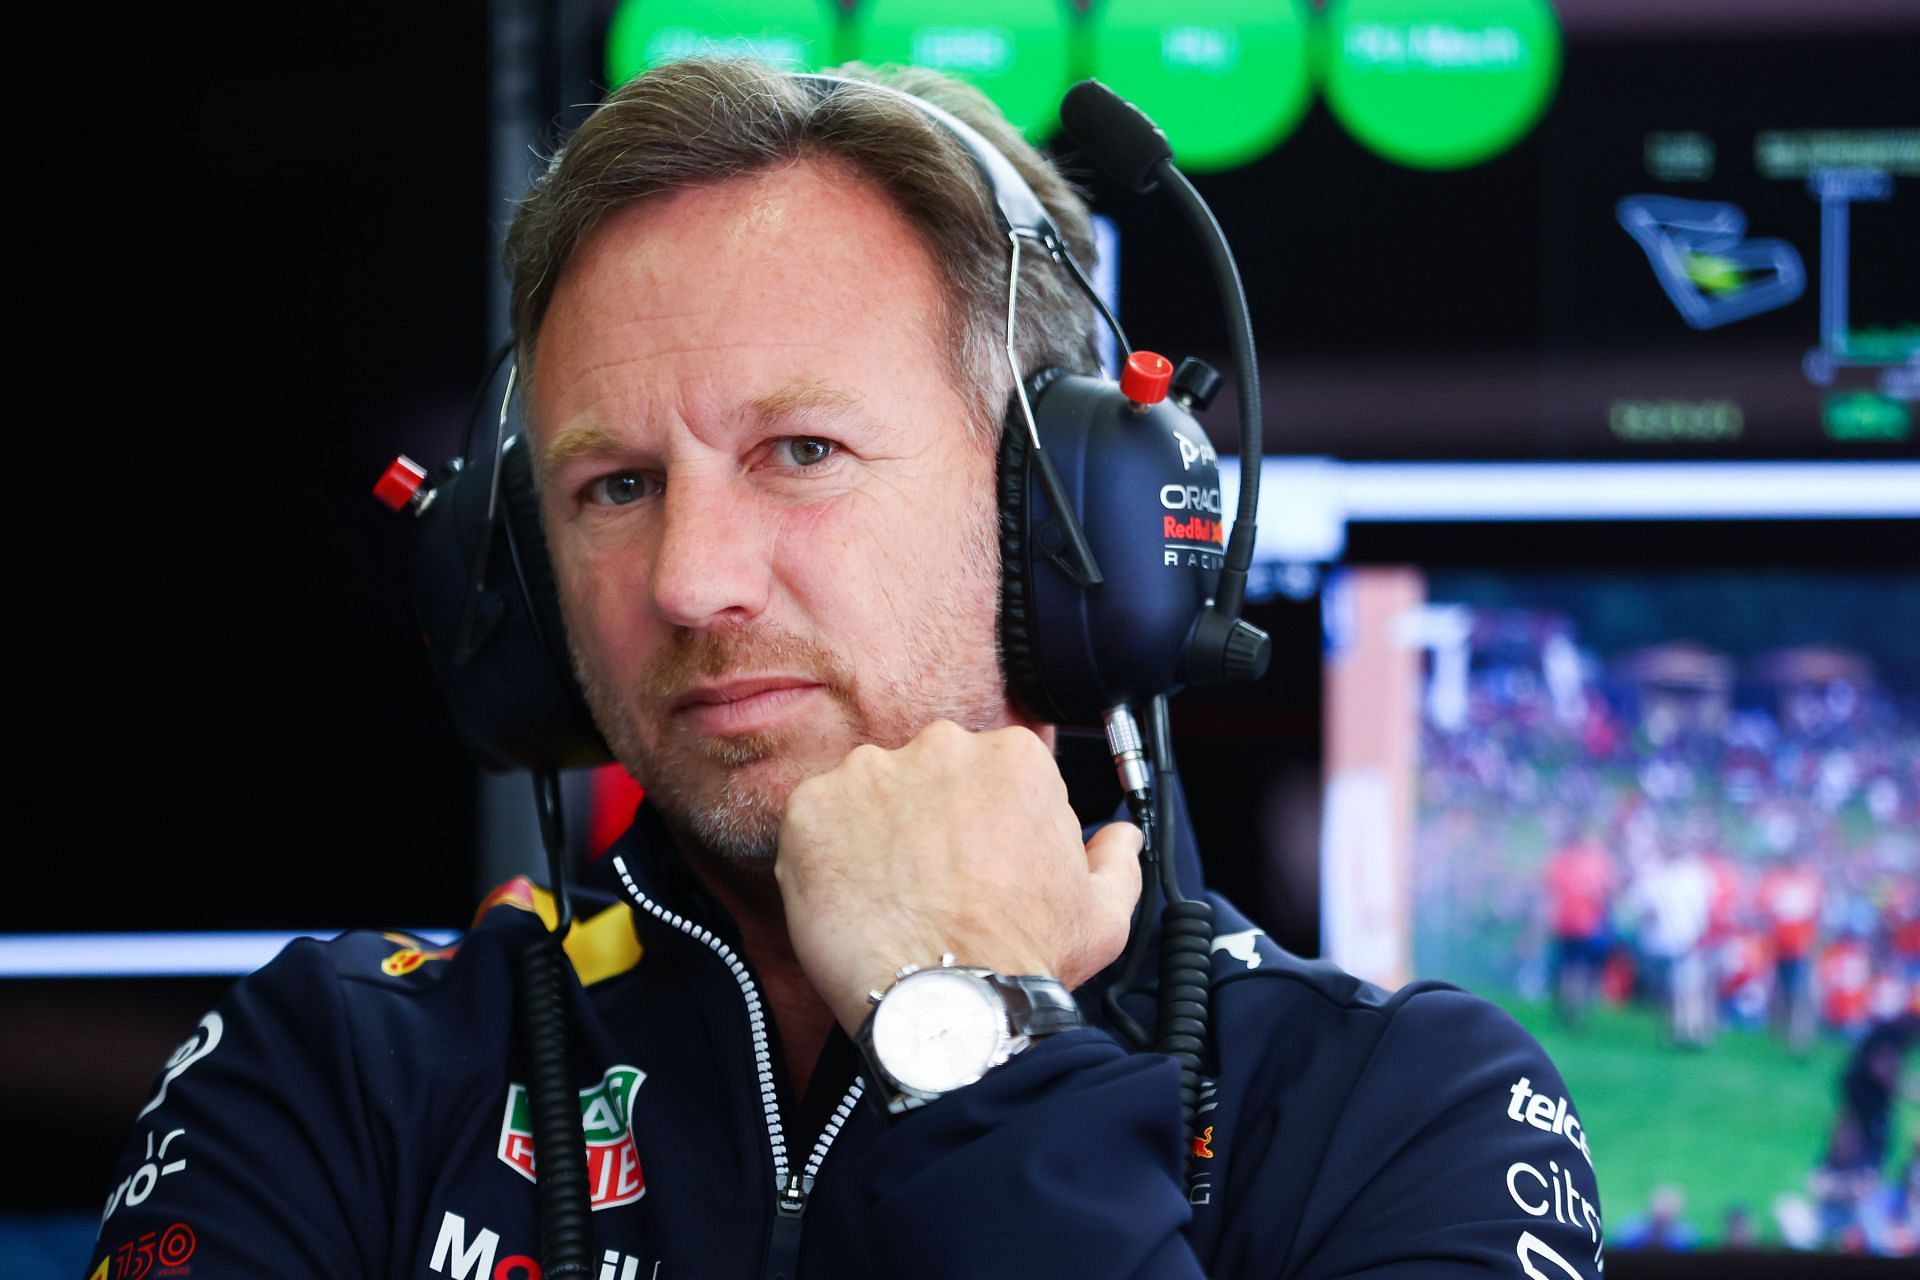 Christian Horner felt that tire management was one of the crucial factors behind Ferrari reigning supreme